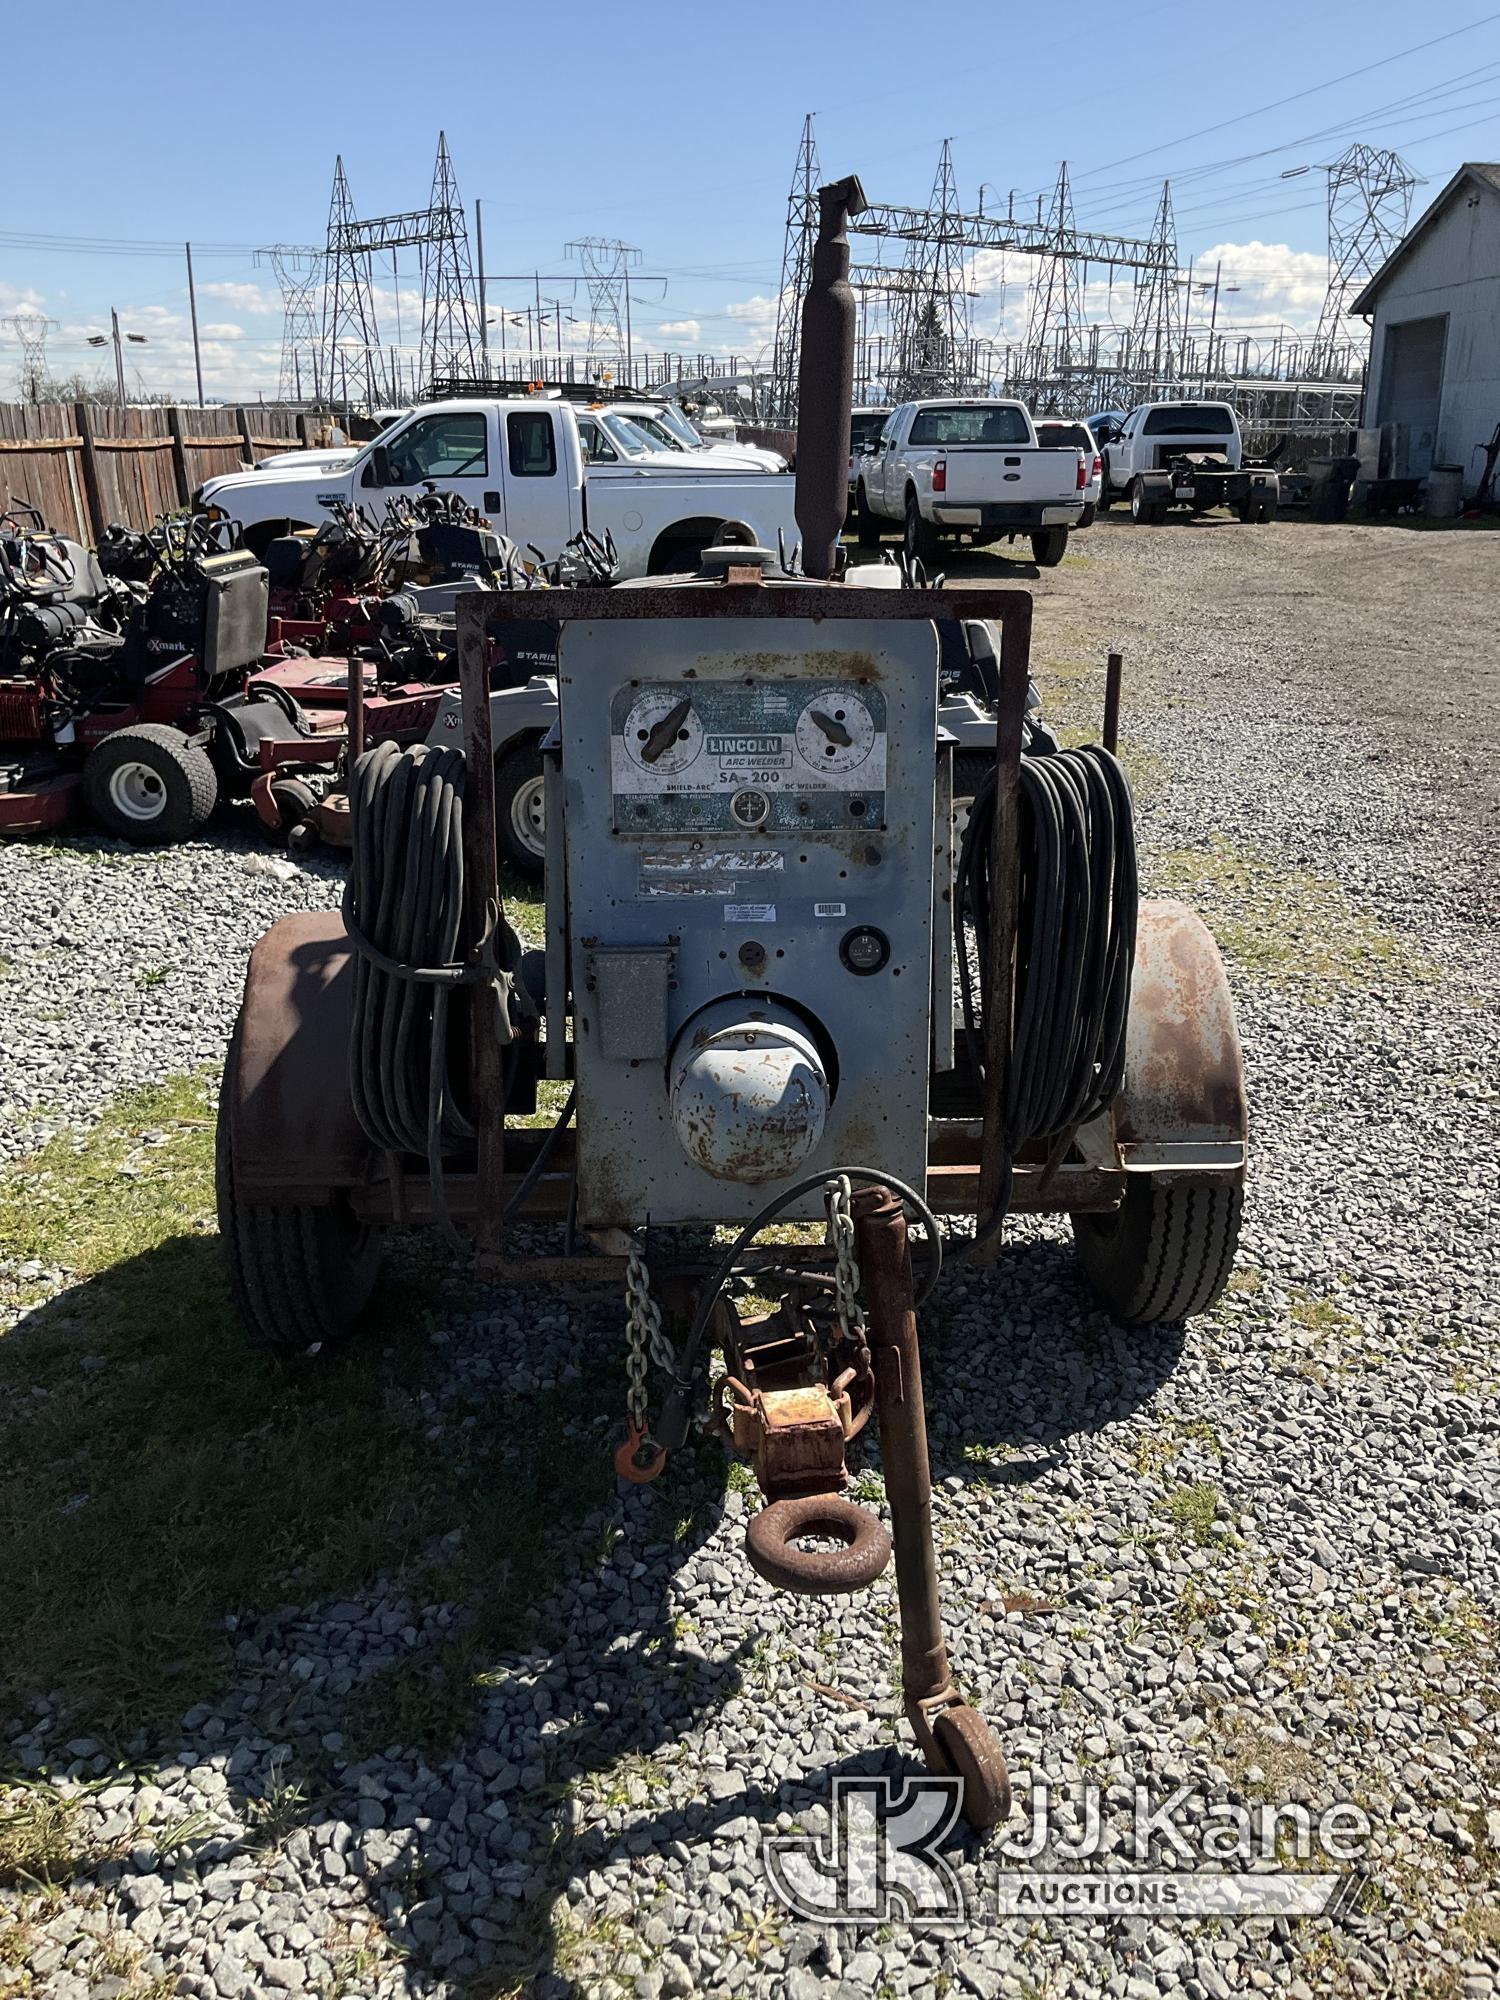 (Tacoma, WA) 1978 Unknown Utility Trailer Not Running, Condition Unknown, Cranks